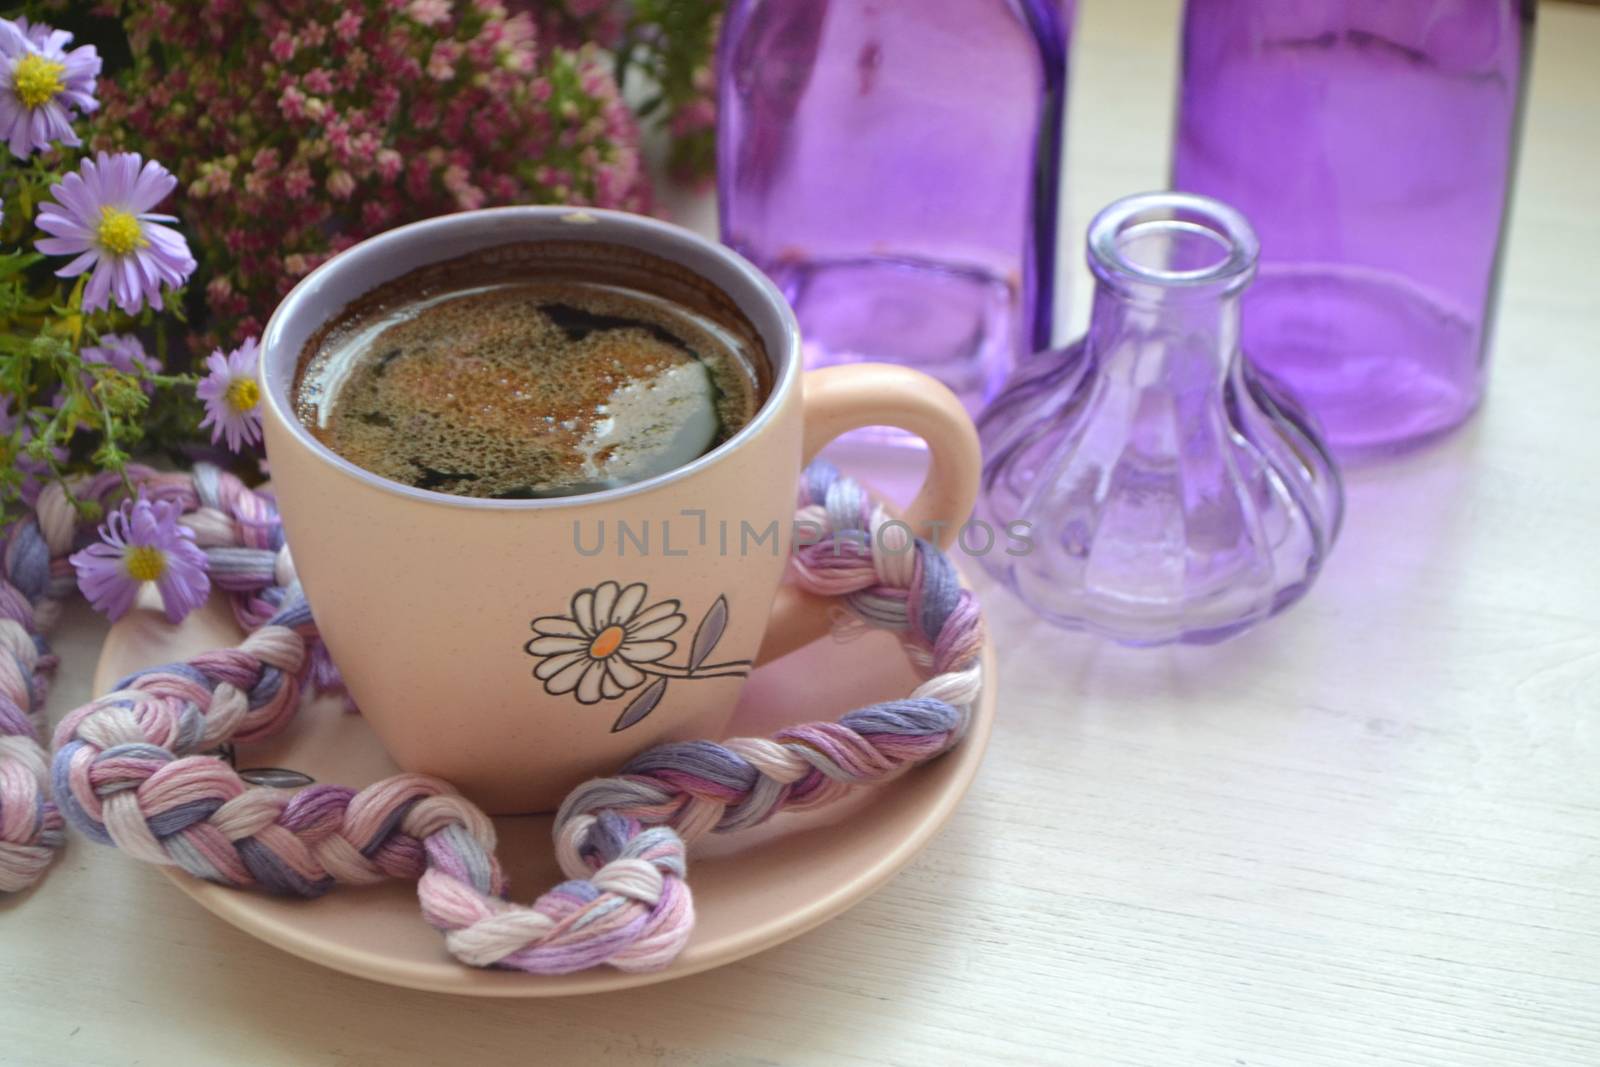 Hot dark coffee in a vintage cup and on an old white wooden background with violet flowers and purple bottles